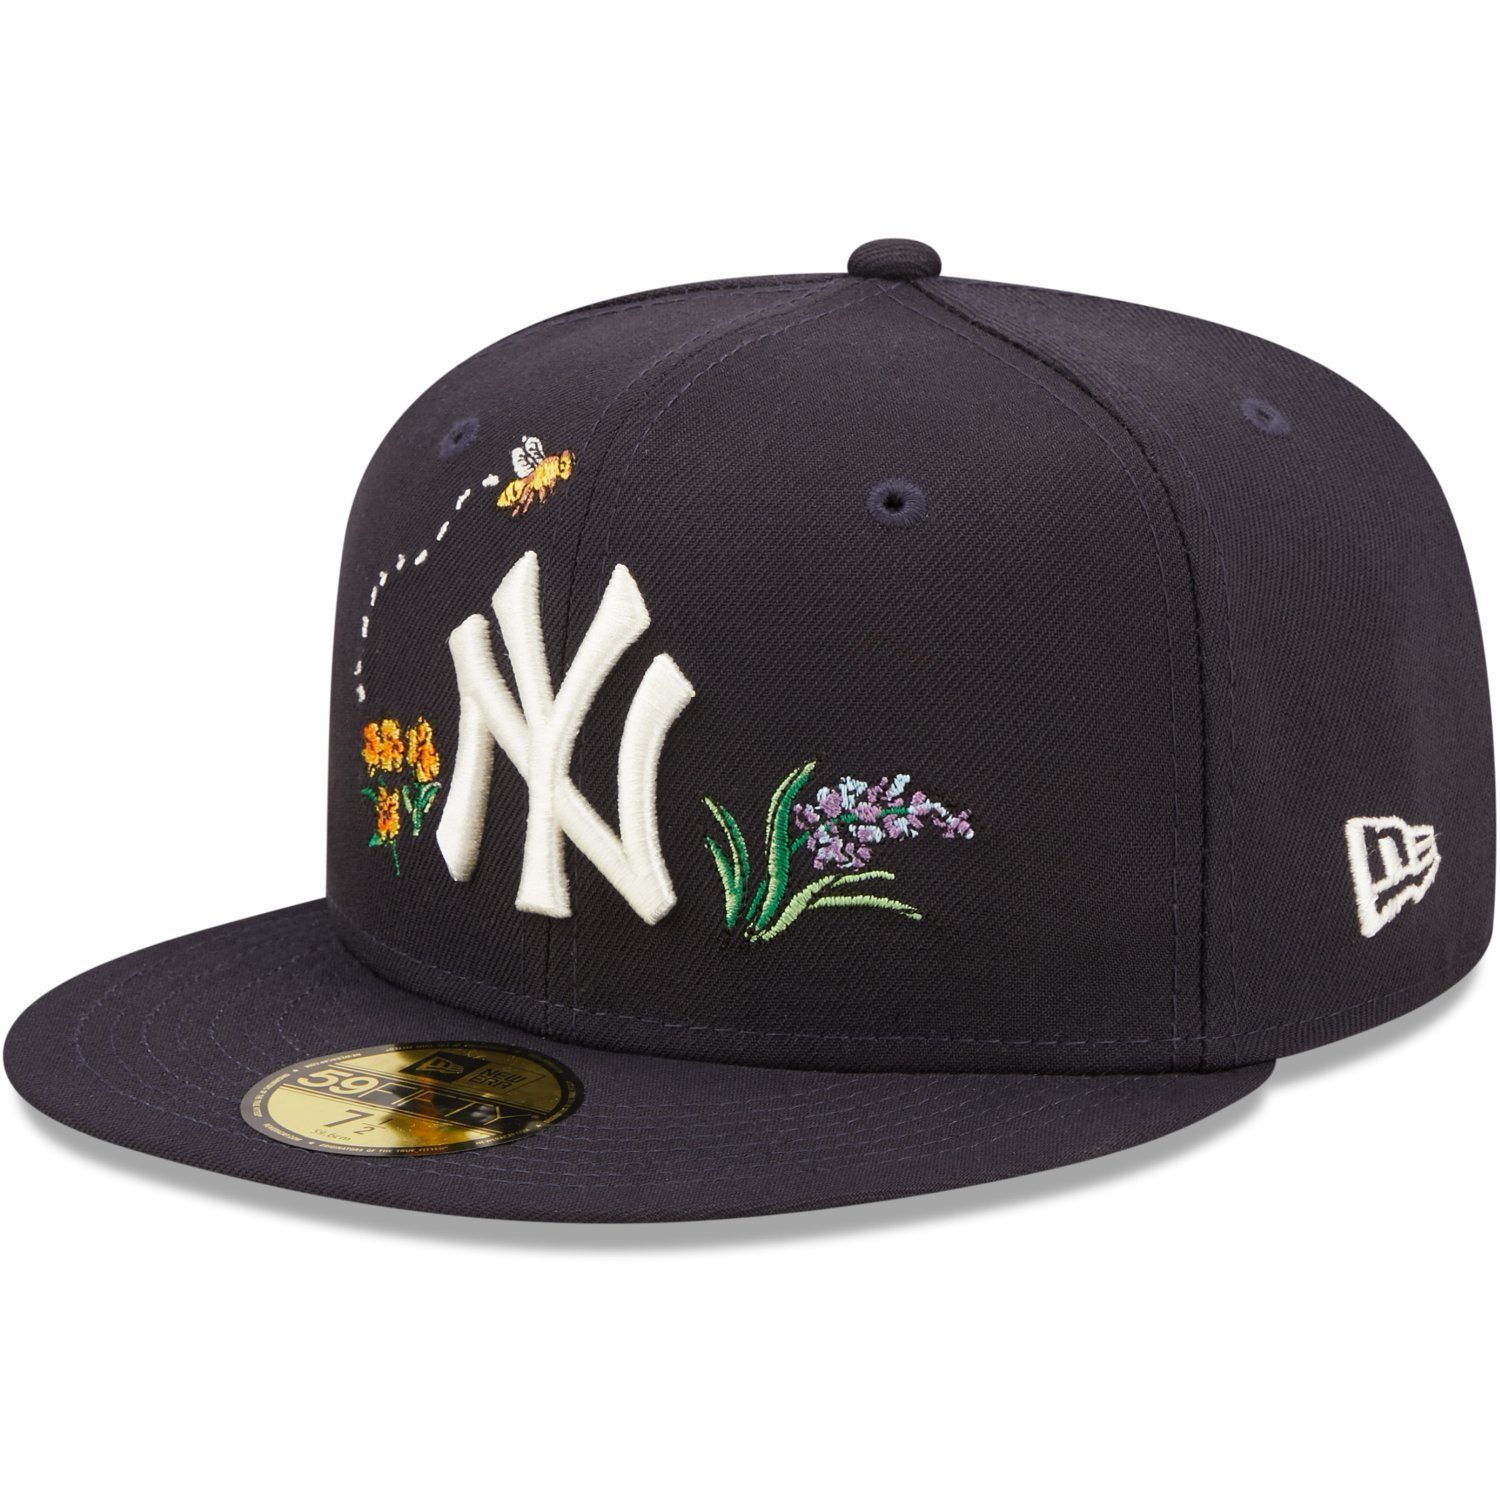 Era WATER New Fitted York FLORAL Cap Yankees New 59Fifty